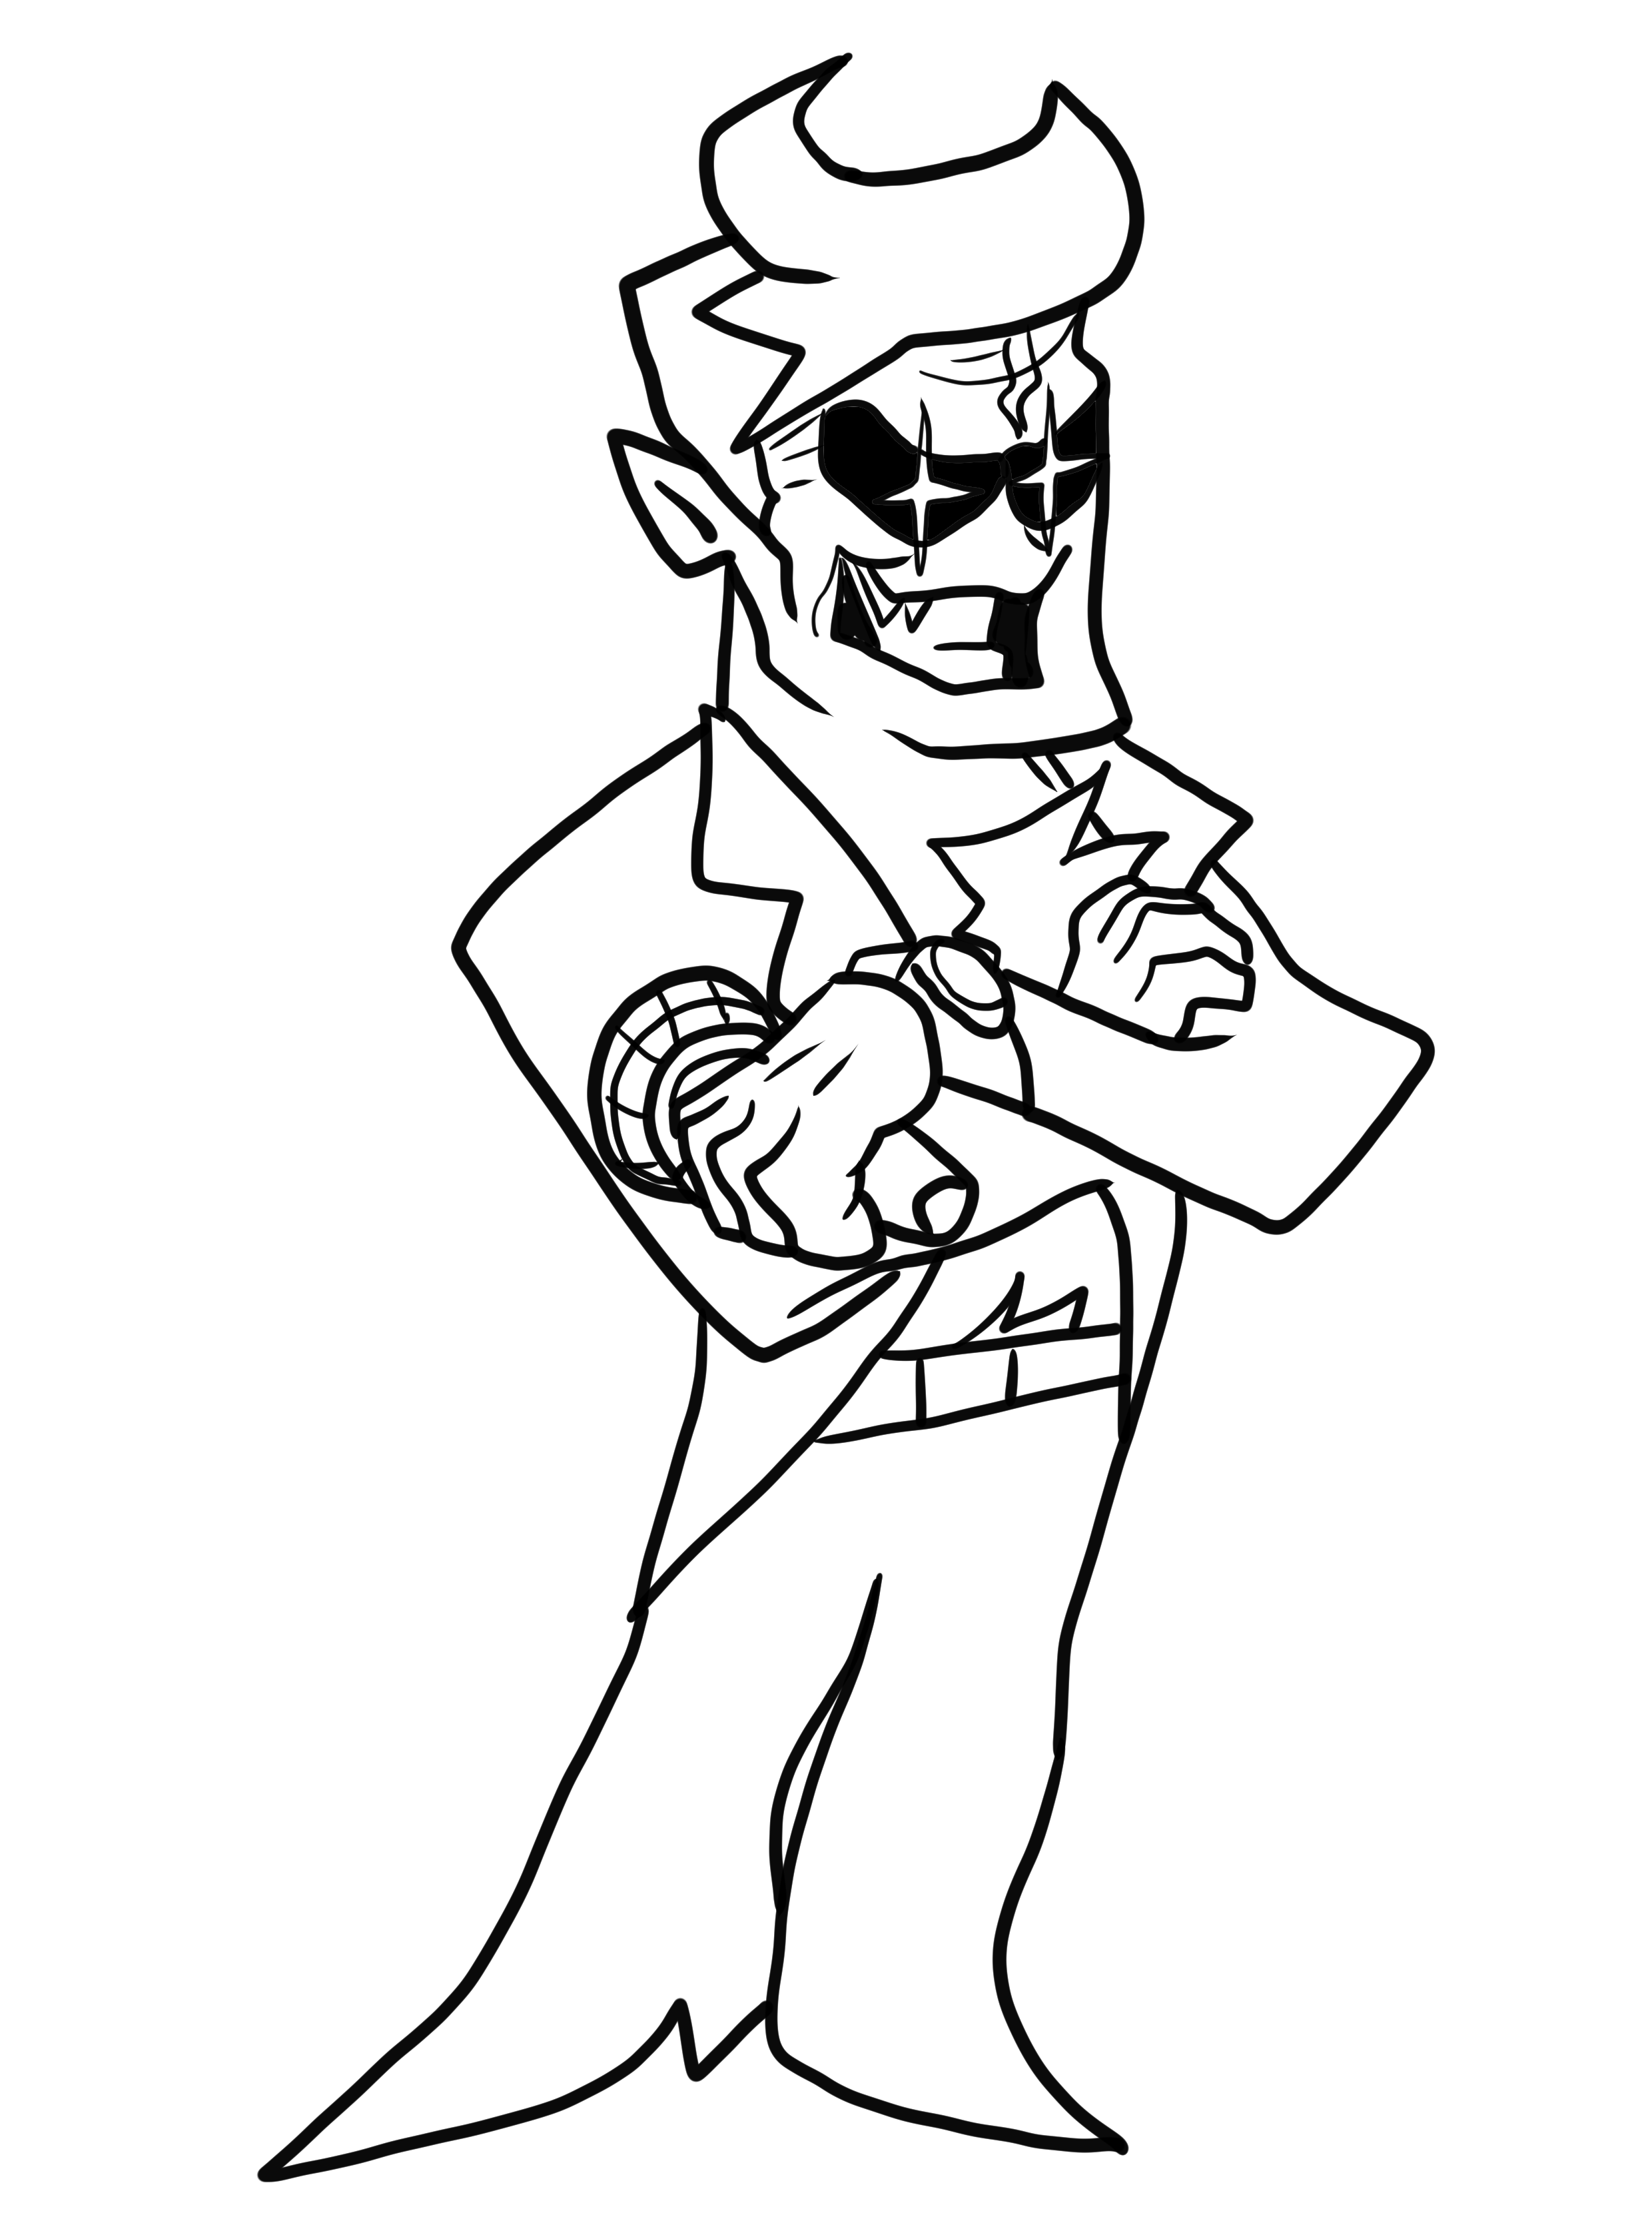 Daddy Dearest from Friday Night Funkin coloring page to print and coloring